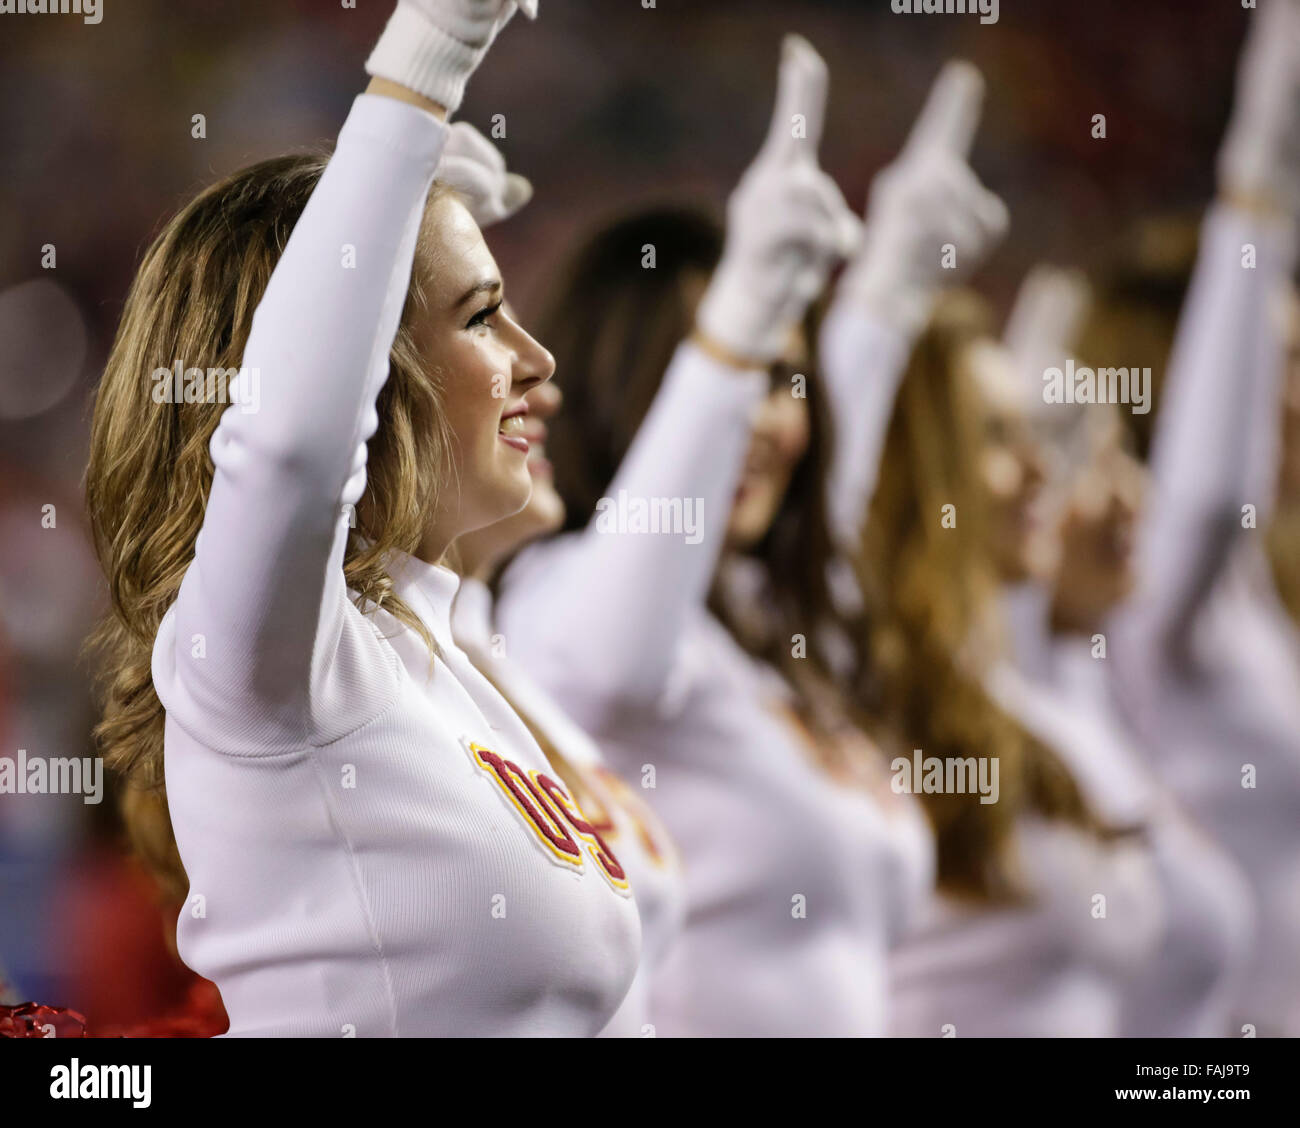 San Diego, California, USA. 30th Dec, 2015. USC Cheerleaders during the National Funding Holiday Bowl NCAA football game between the University of Southern California Trojans and the Wisconsin Badgers at Qualcomm Stadium in San Diego, California. Wisconsin defeats USC 23-21. Justin Cooper/CSM/Alamy Live News Stock Photo